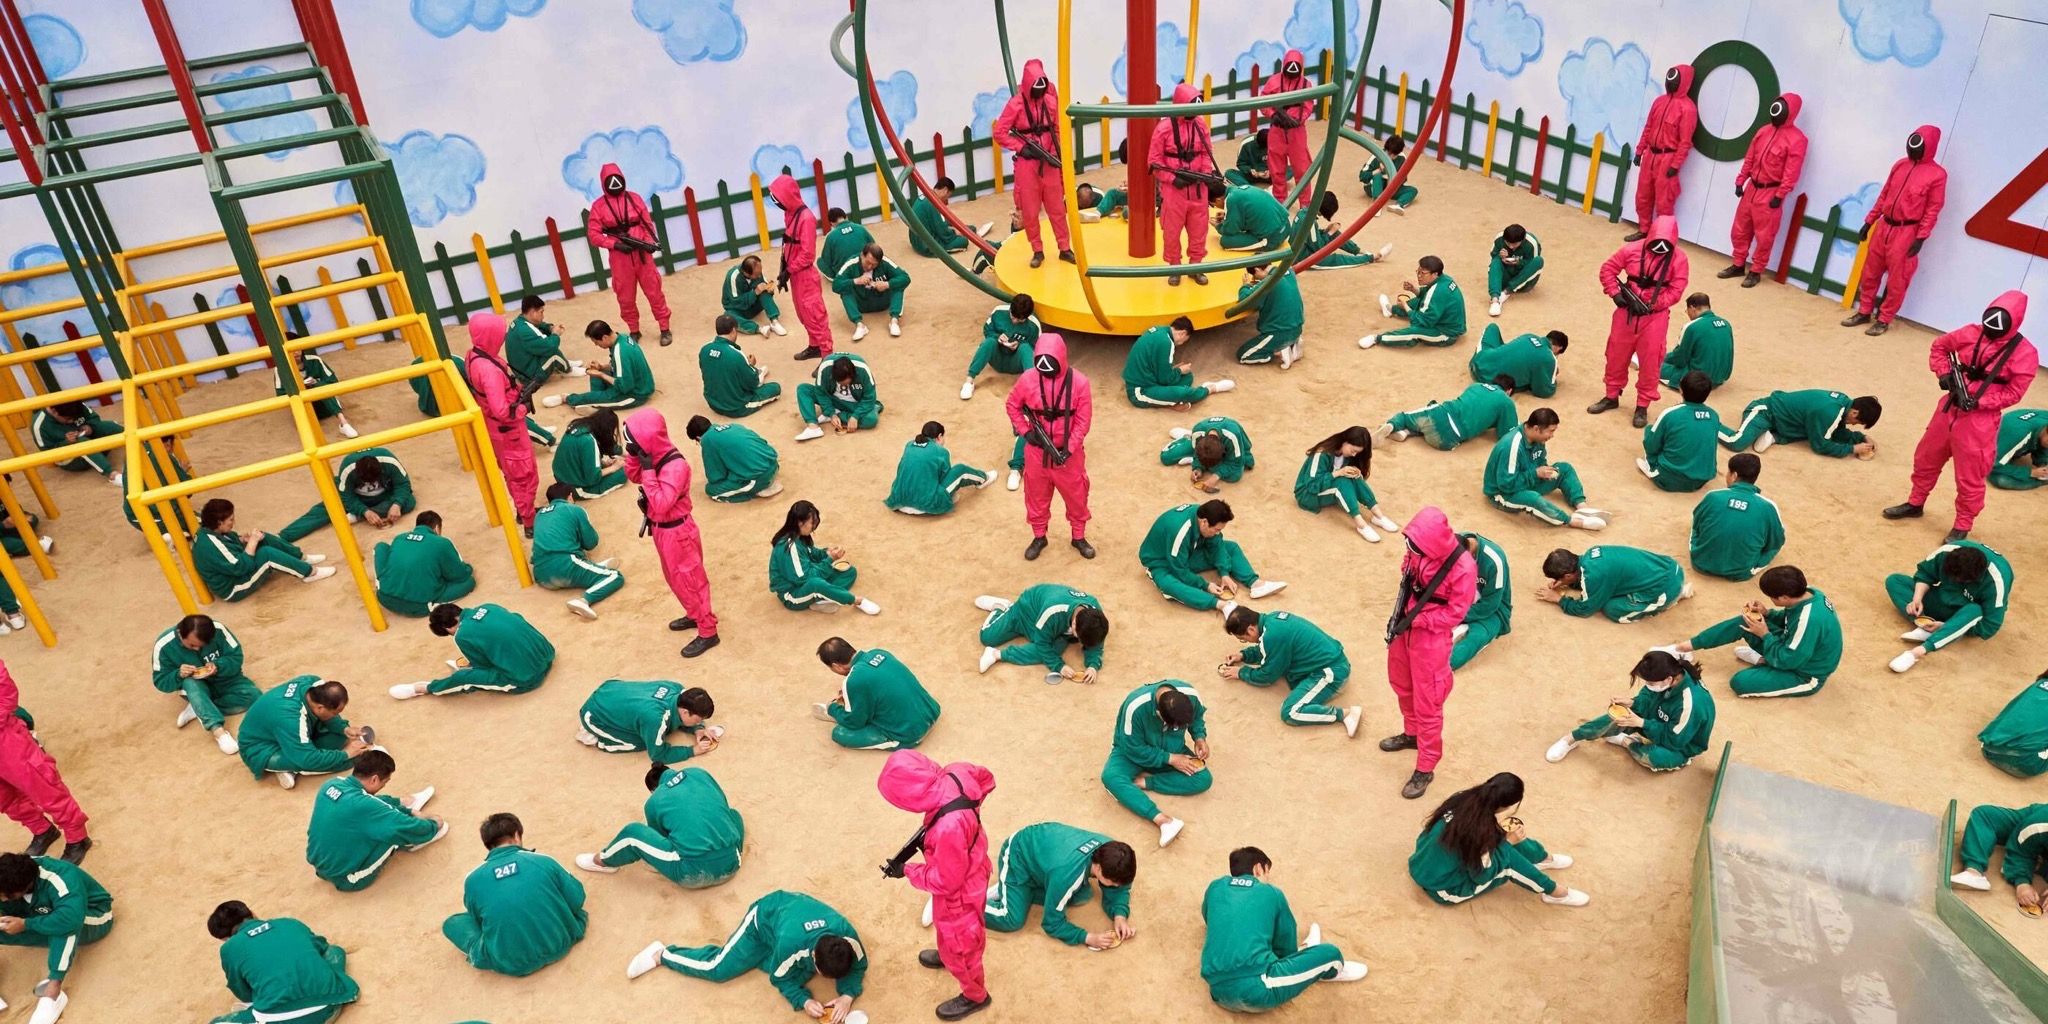 Everyone competing in Squid Game with players in green tracksuits and guards in pink ones